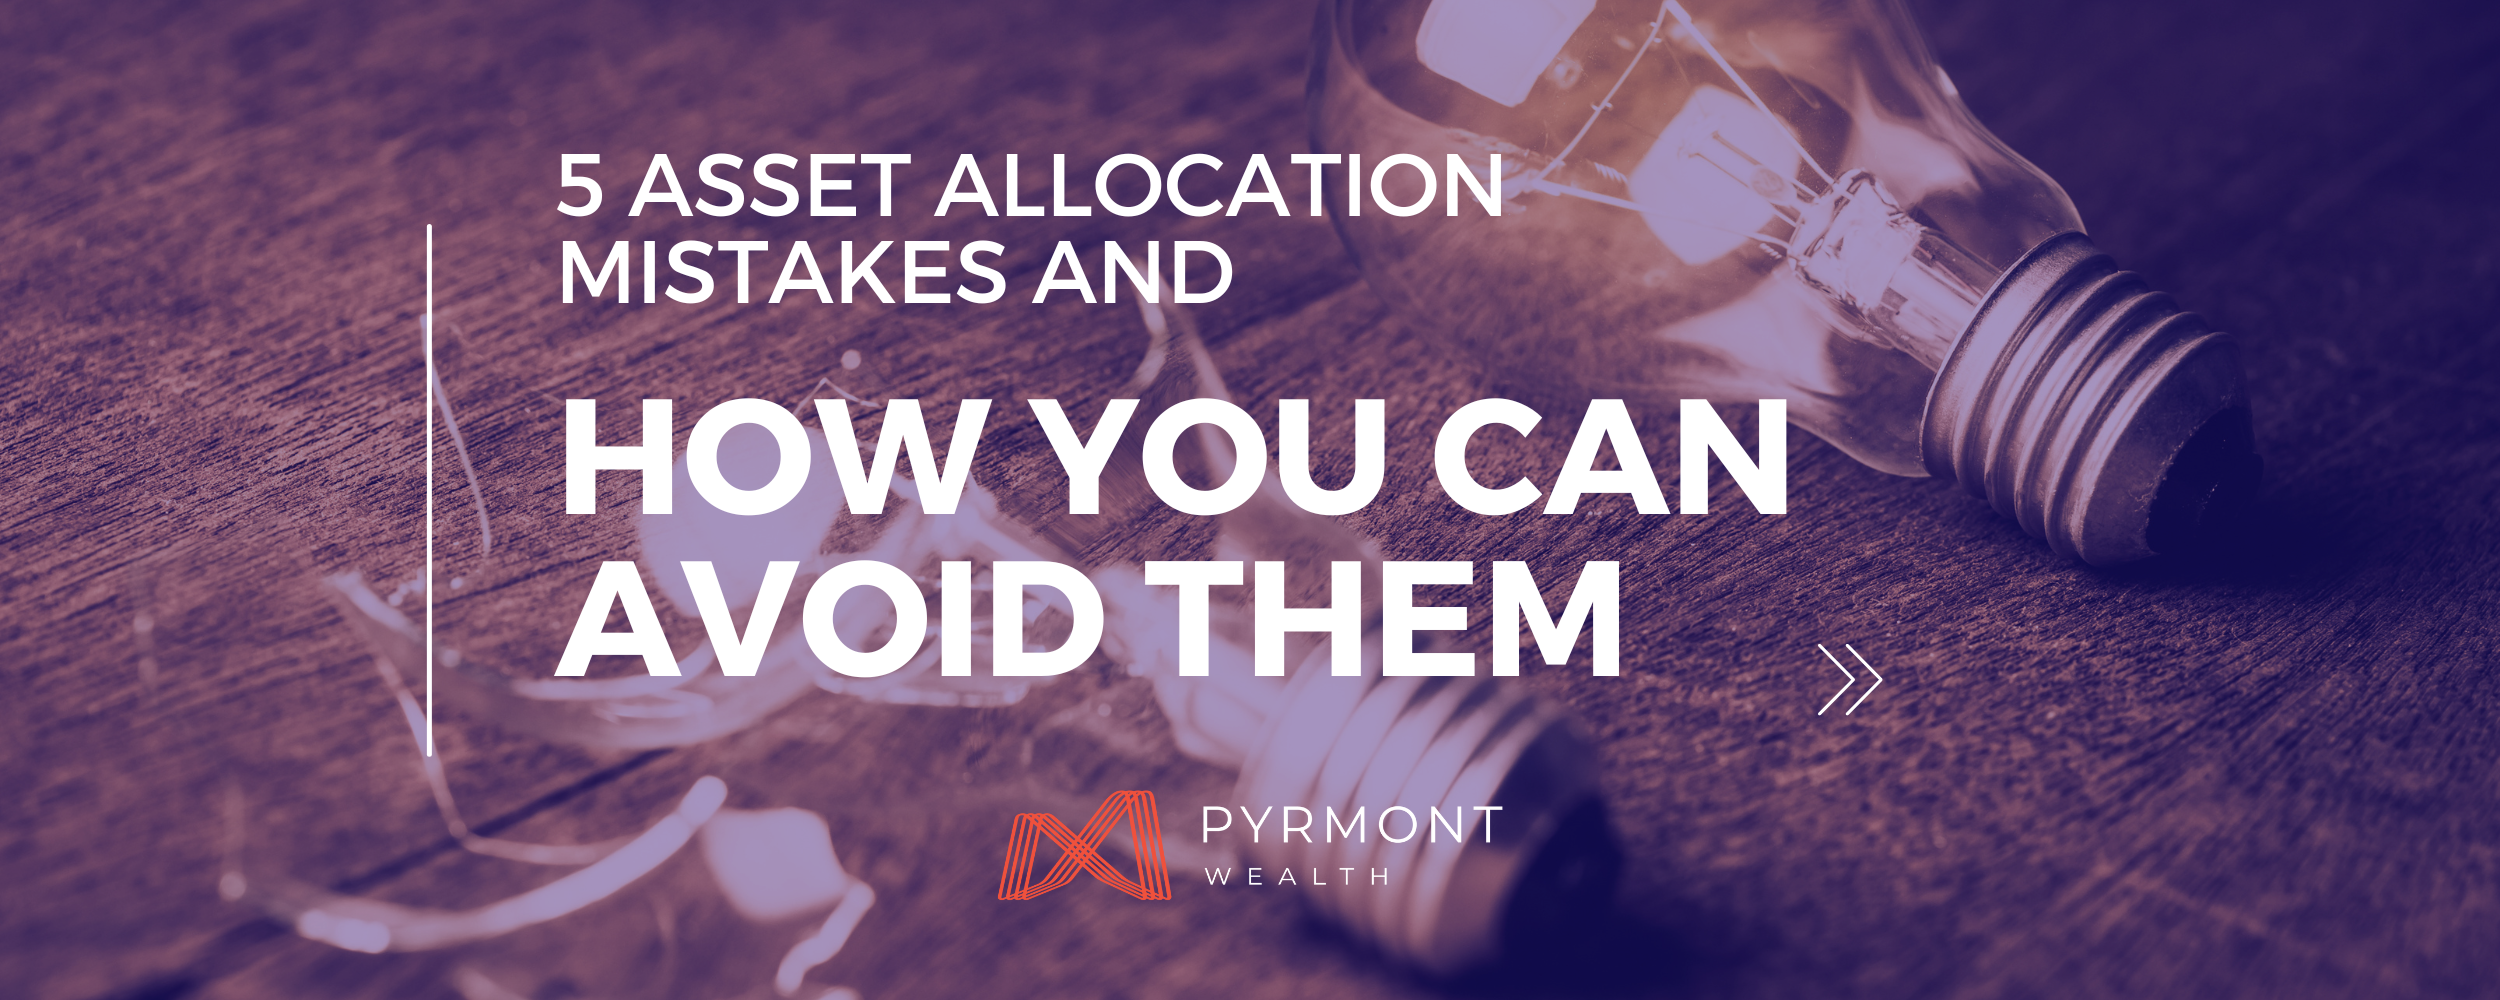 PYRMONT WEALTH-5 ASSET ALLOCATION MISTAKES AND HOW YOU CAN AVOID THEM